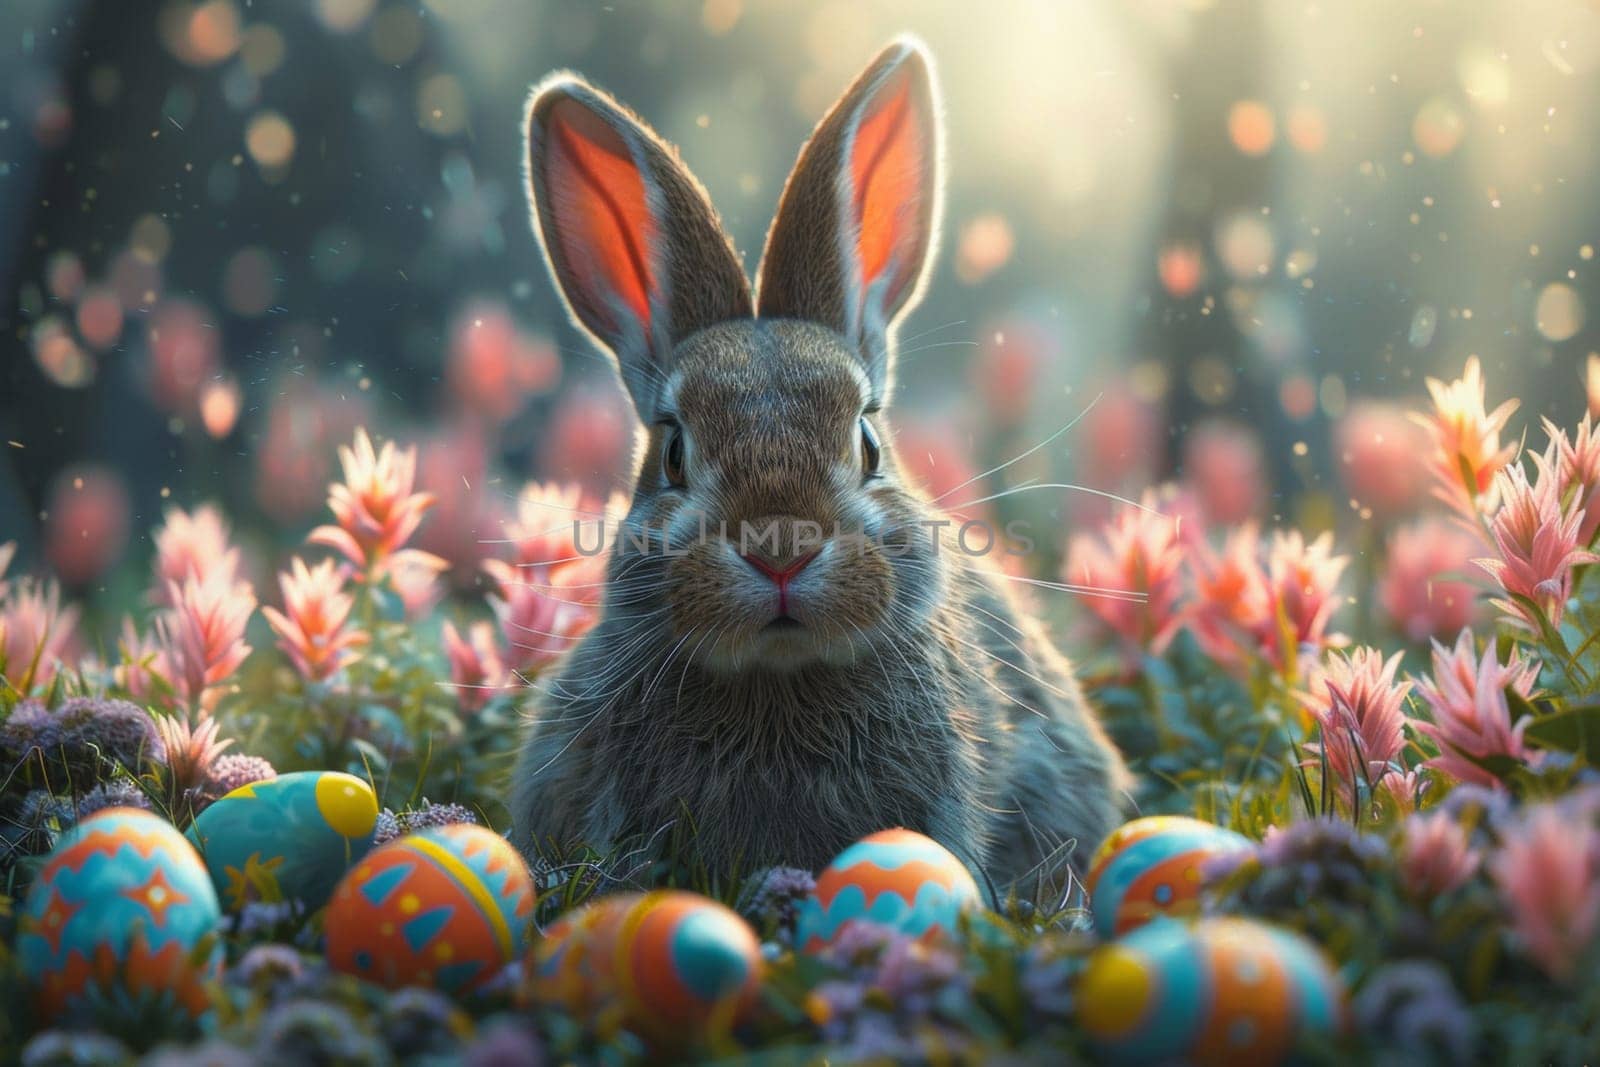 A rabbit is sitting in a field of flowers and eggs by nateemee